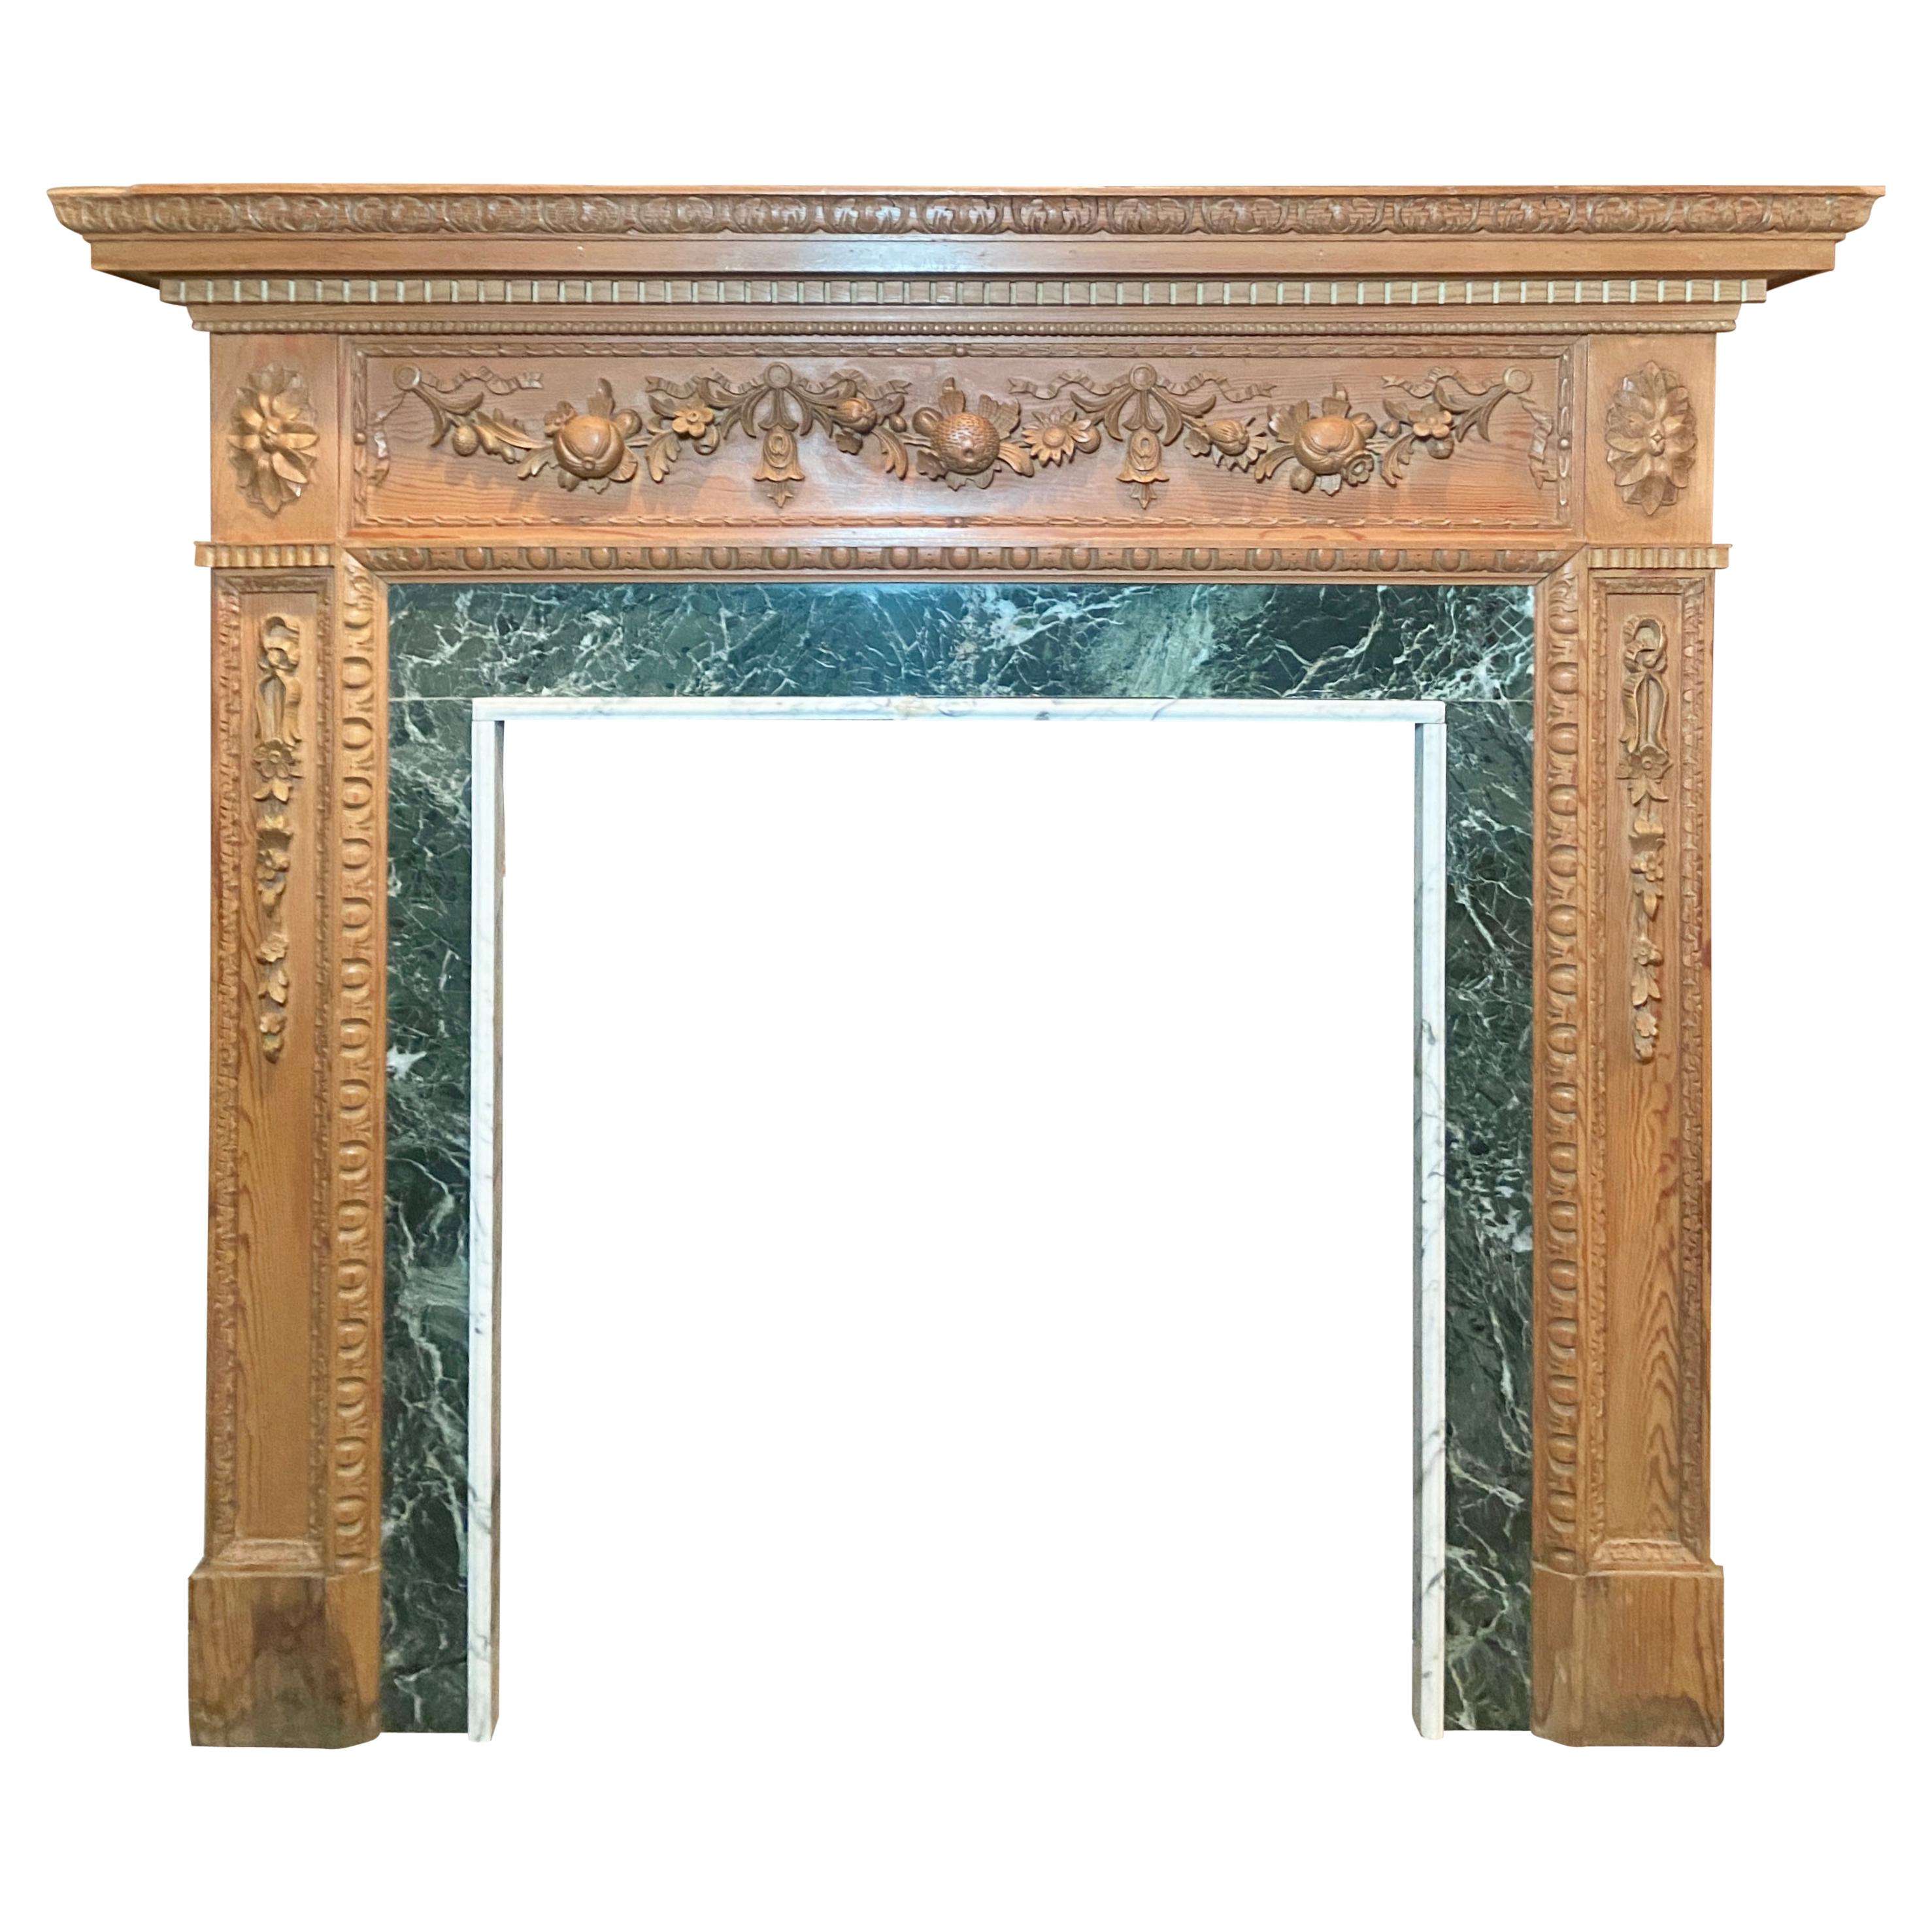 Antique 19th Century English Adams Style Carved Wood Mantel with Marble Inset. For Sale